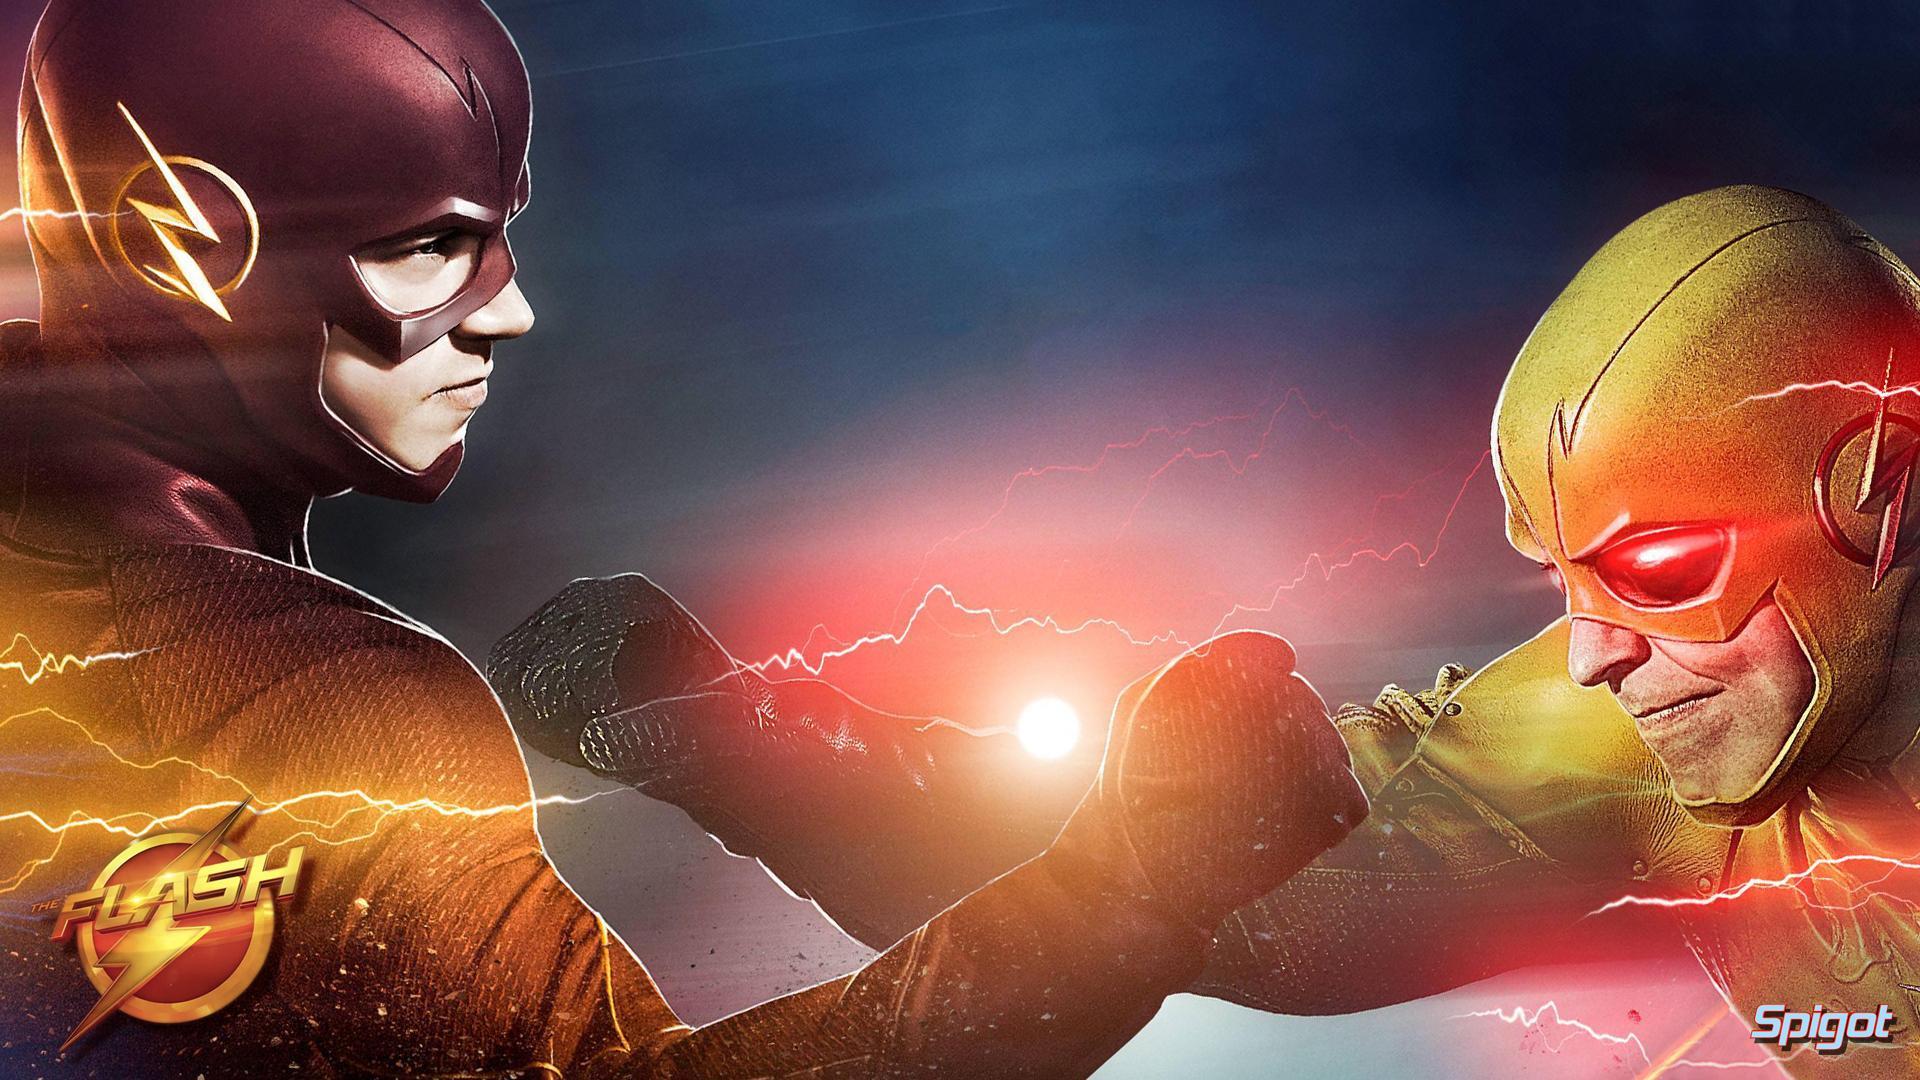 The Flash 4K Movie Wallpapers - Top Free The Flash 4K Movie Backgrounds